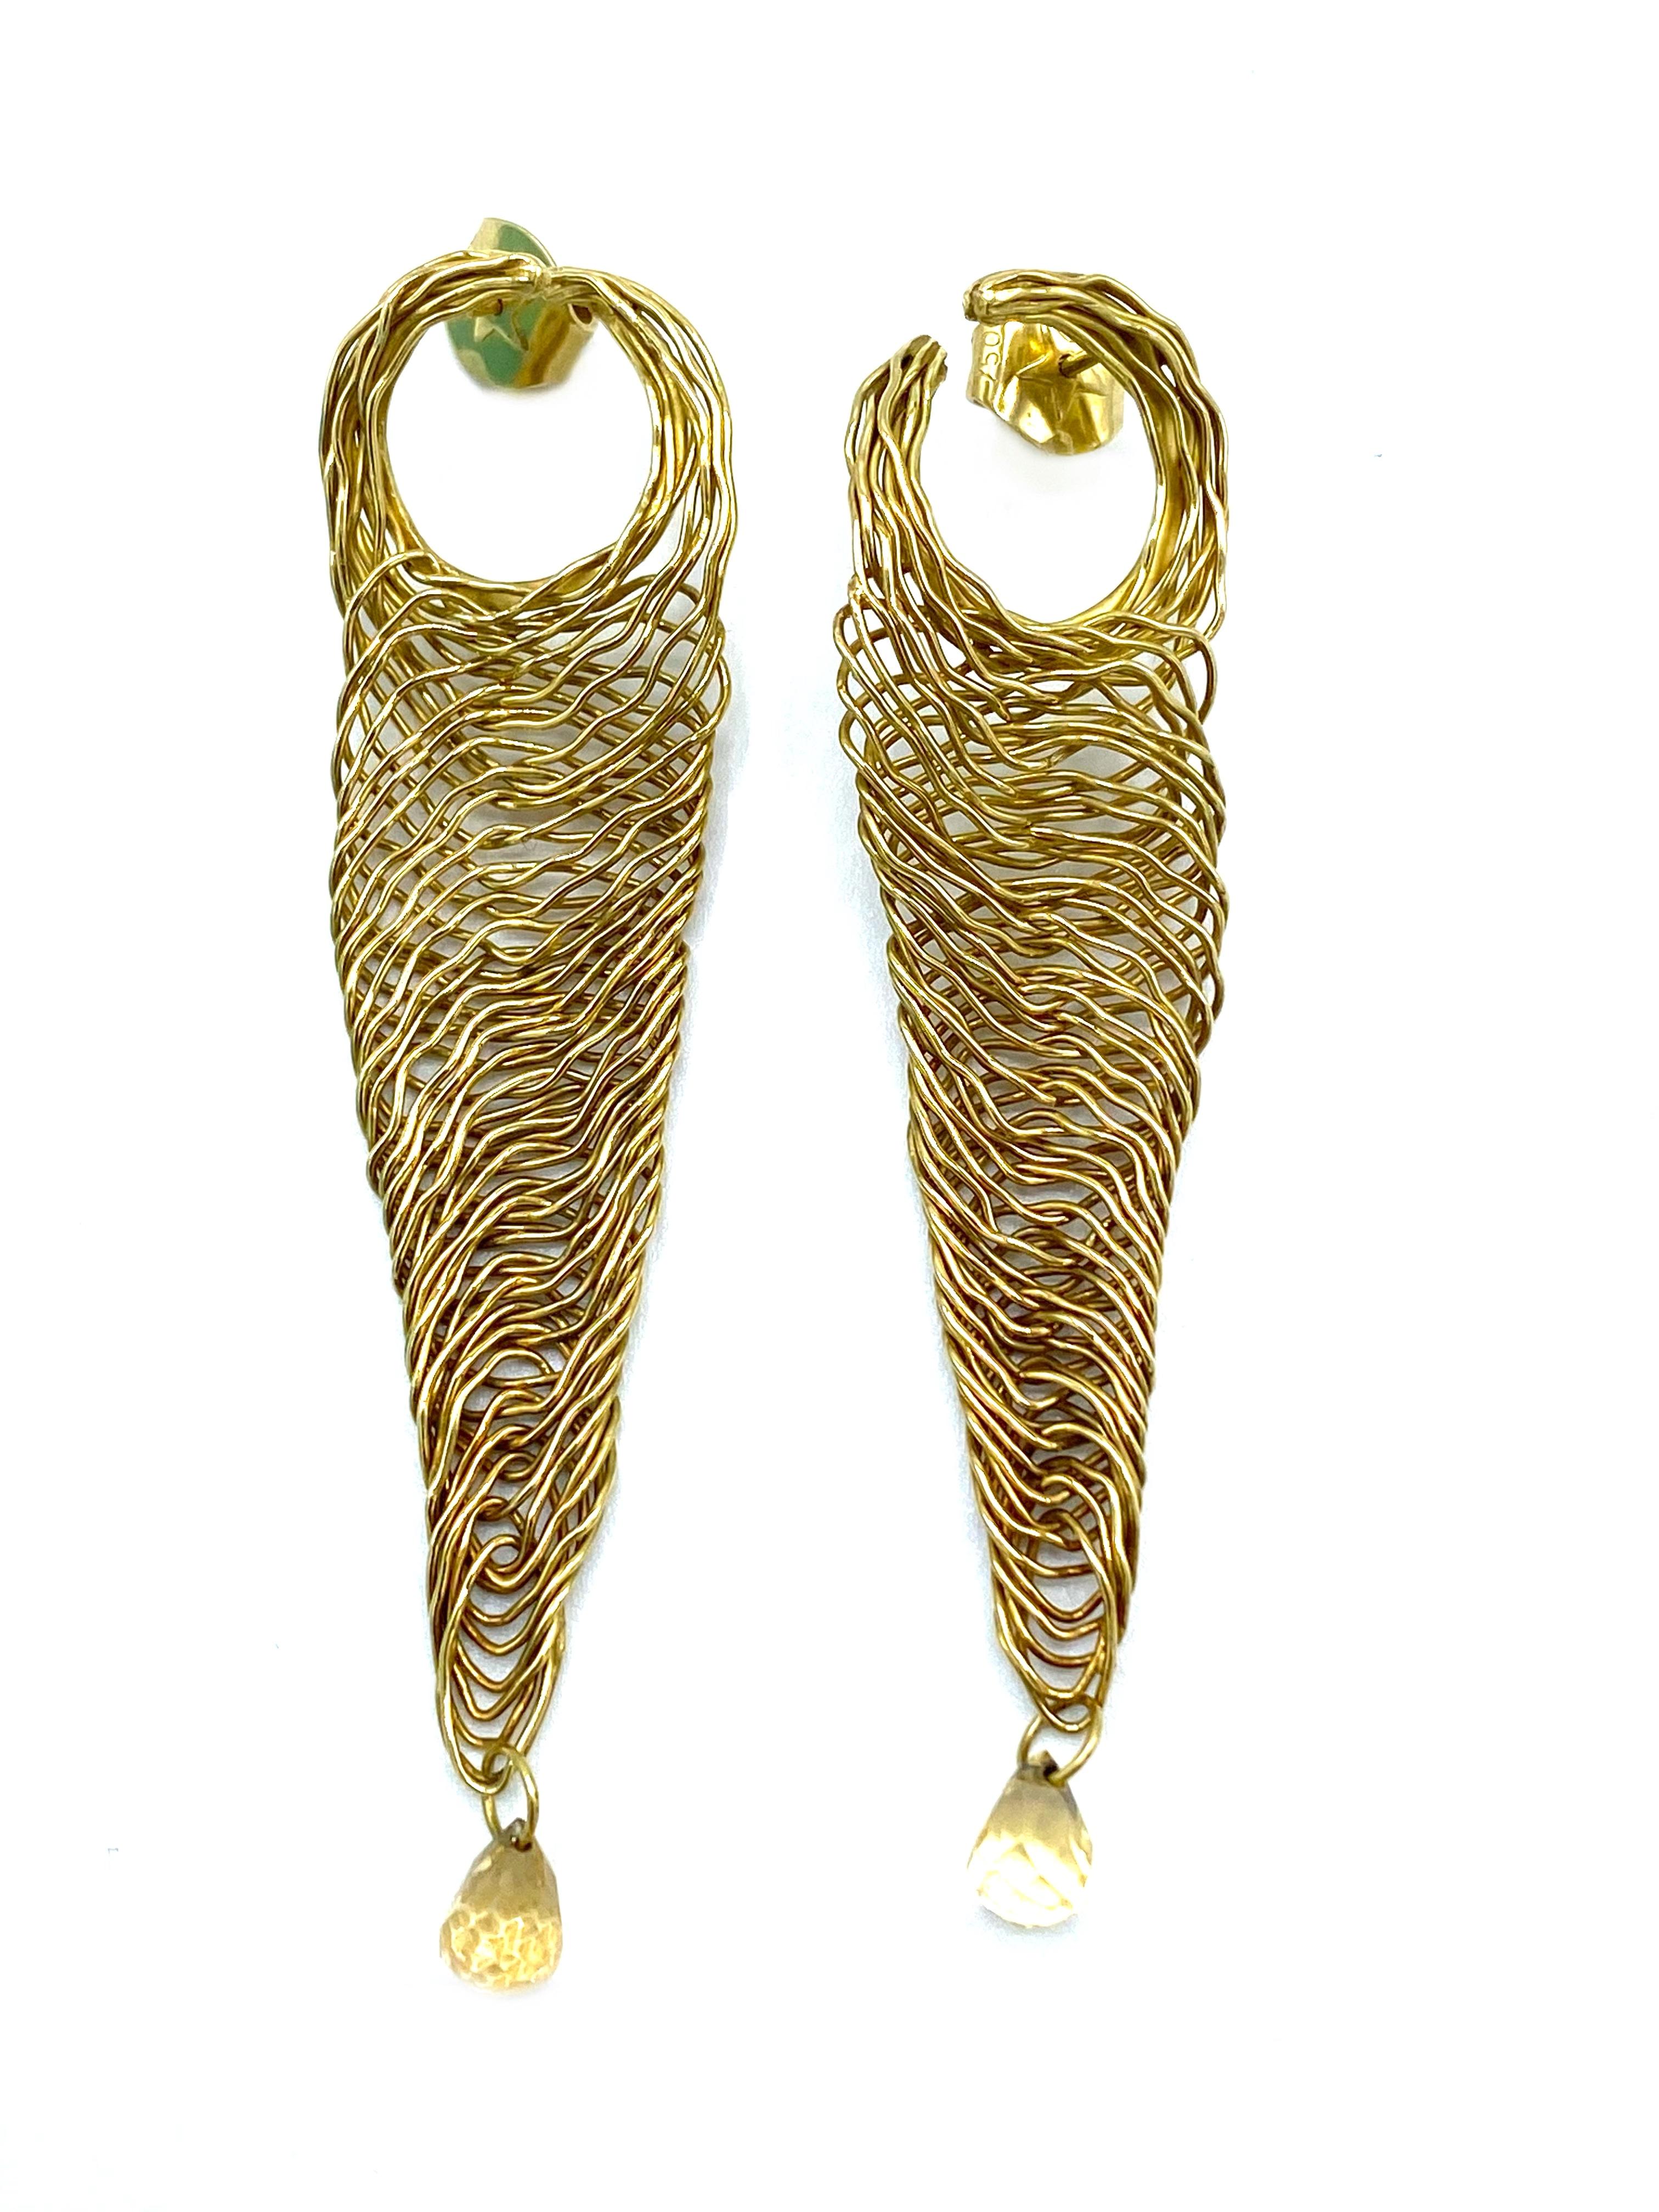 Product details:

The earrings are designed by H. Stern in 1990's, it is made out of 18 karat yellow gold and rutilated quartz. They feature wired finish and stud closure.
Total weight is 13.4 grams.
The measurements are 3 inches long and 0.75 inch